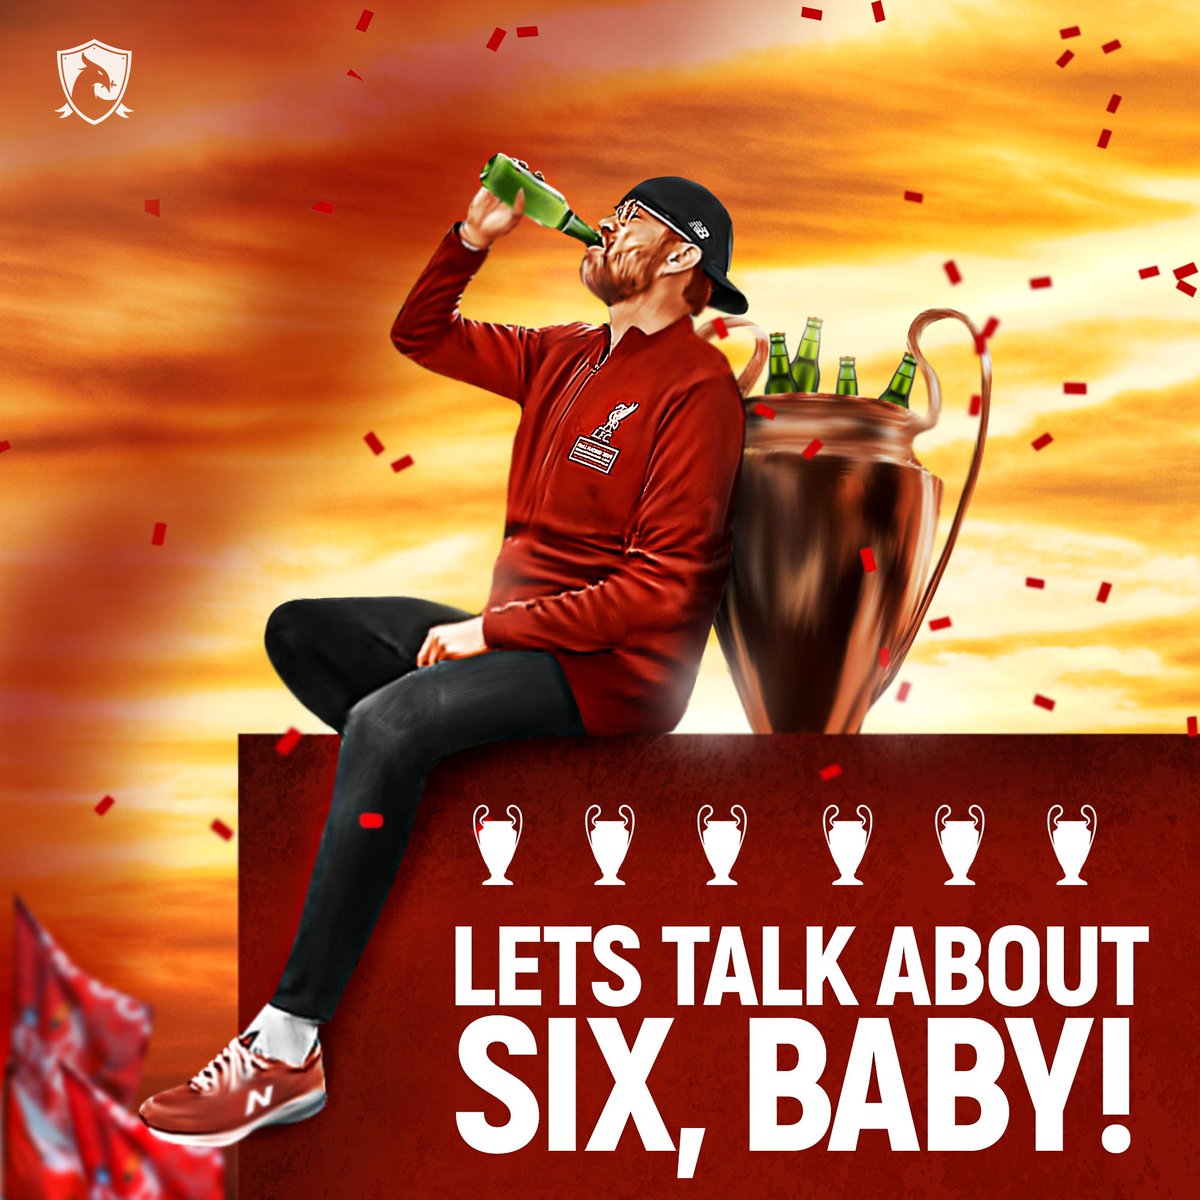 Let's talk about six, baby! #LFCParade